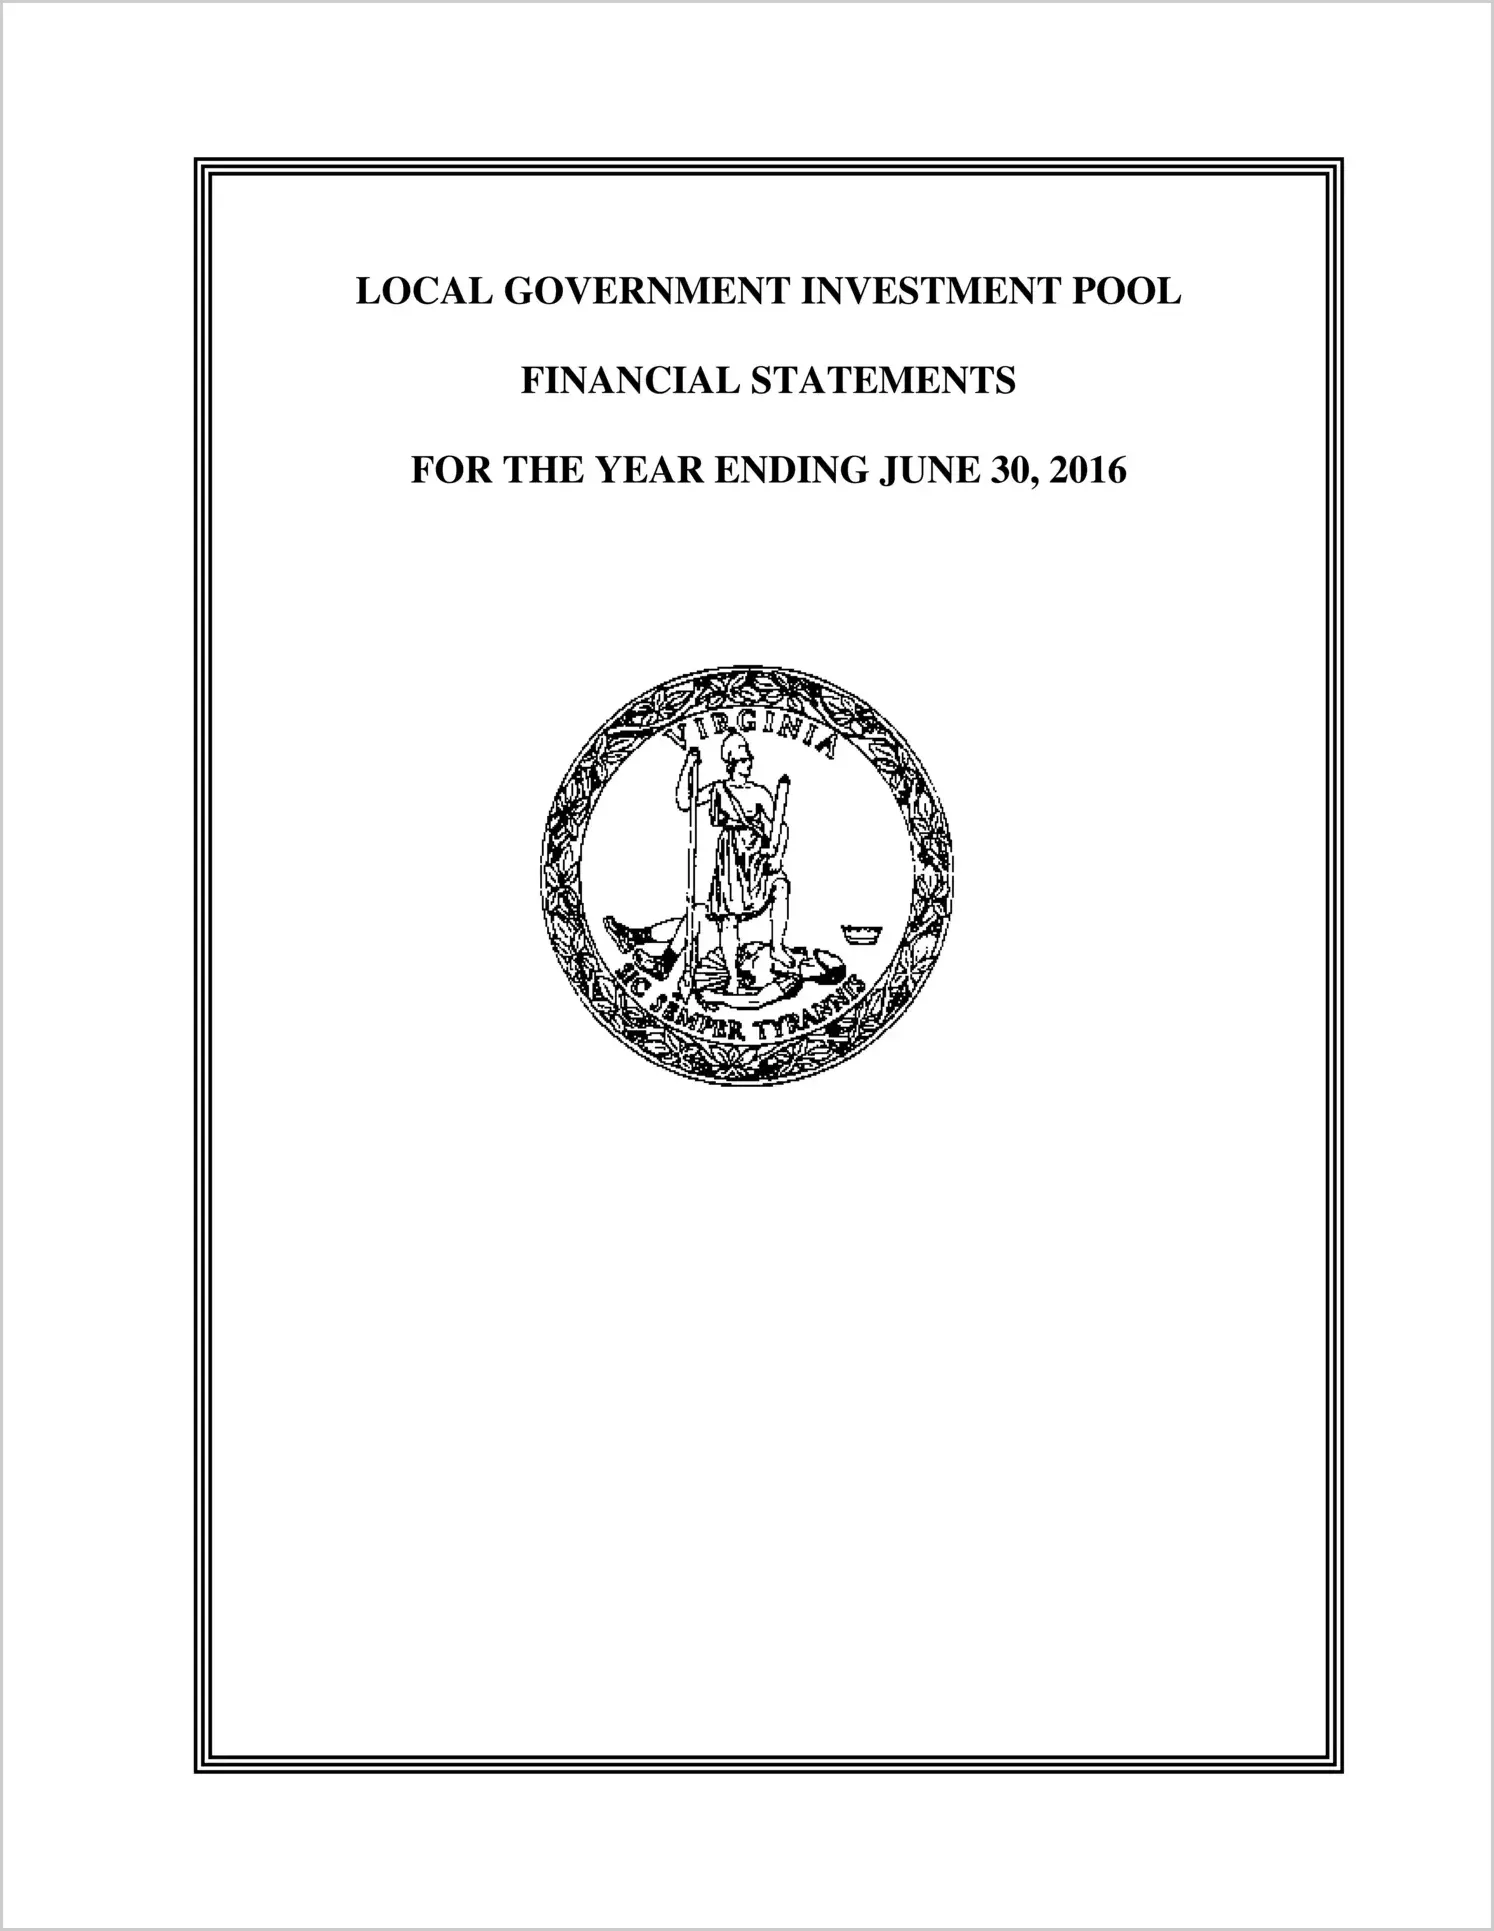 Local Government Investment Pool Financial Statements for the Year Ended June 30, 2016